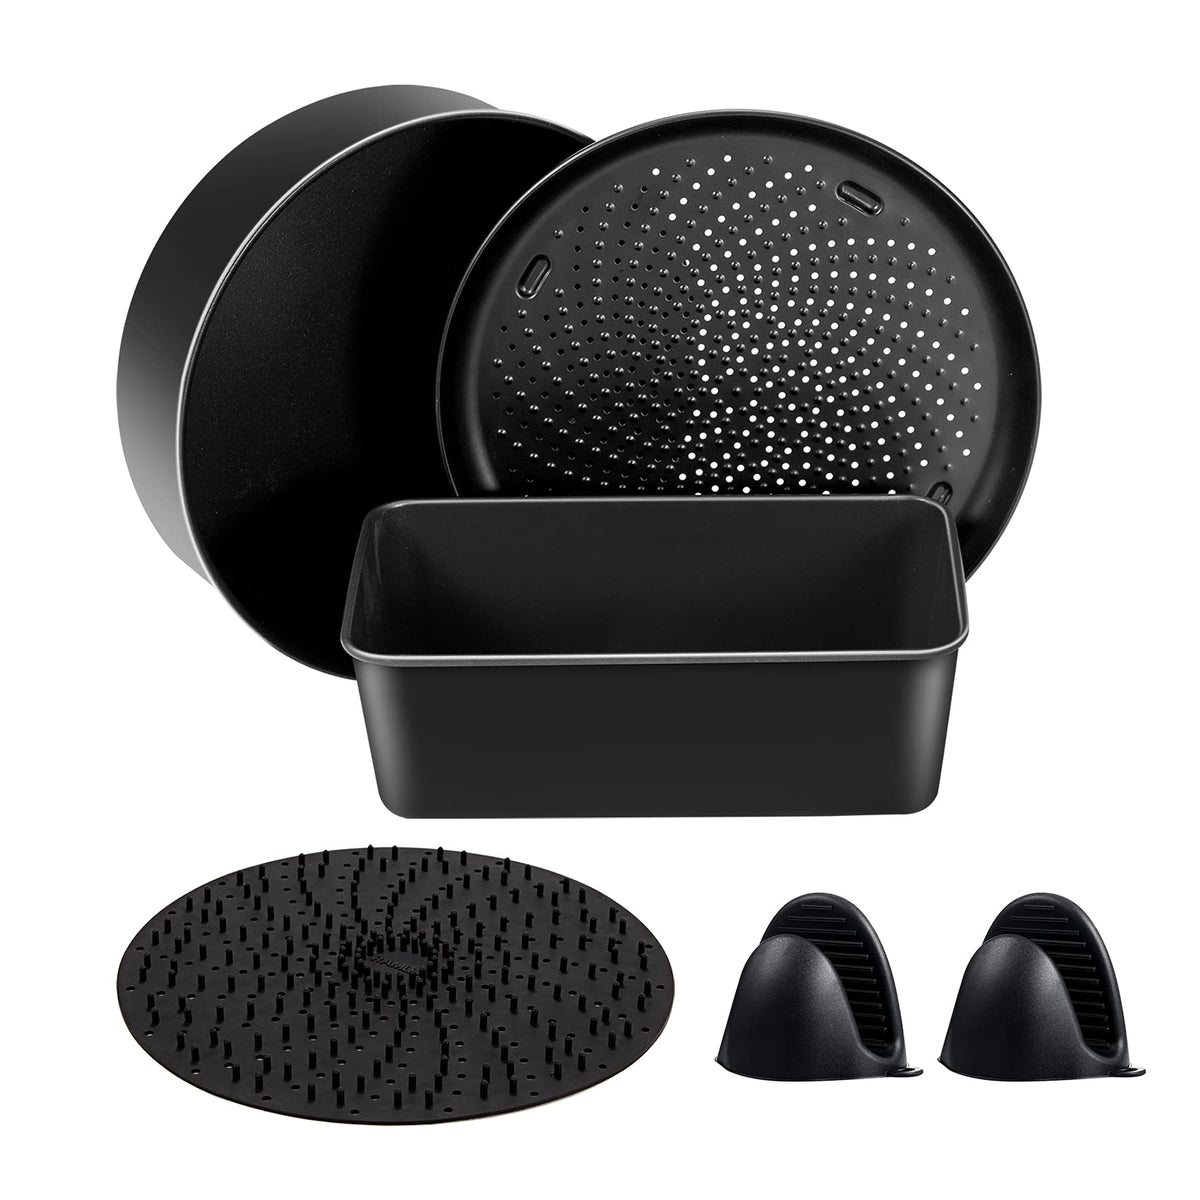 Esjay Cake Baking Pan Set Compatible with Ninja Foodi 6.5, 8Qt, Accessories  Compatible with Instant Pot 6, 8Qt, Air Fryer Accessories Cake Baking Pan